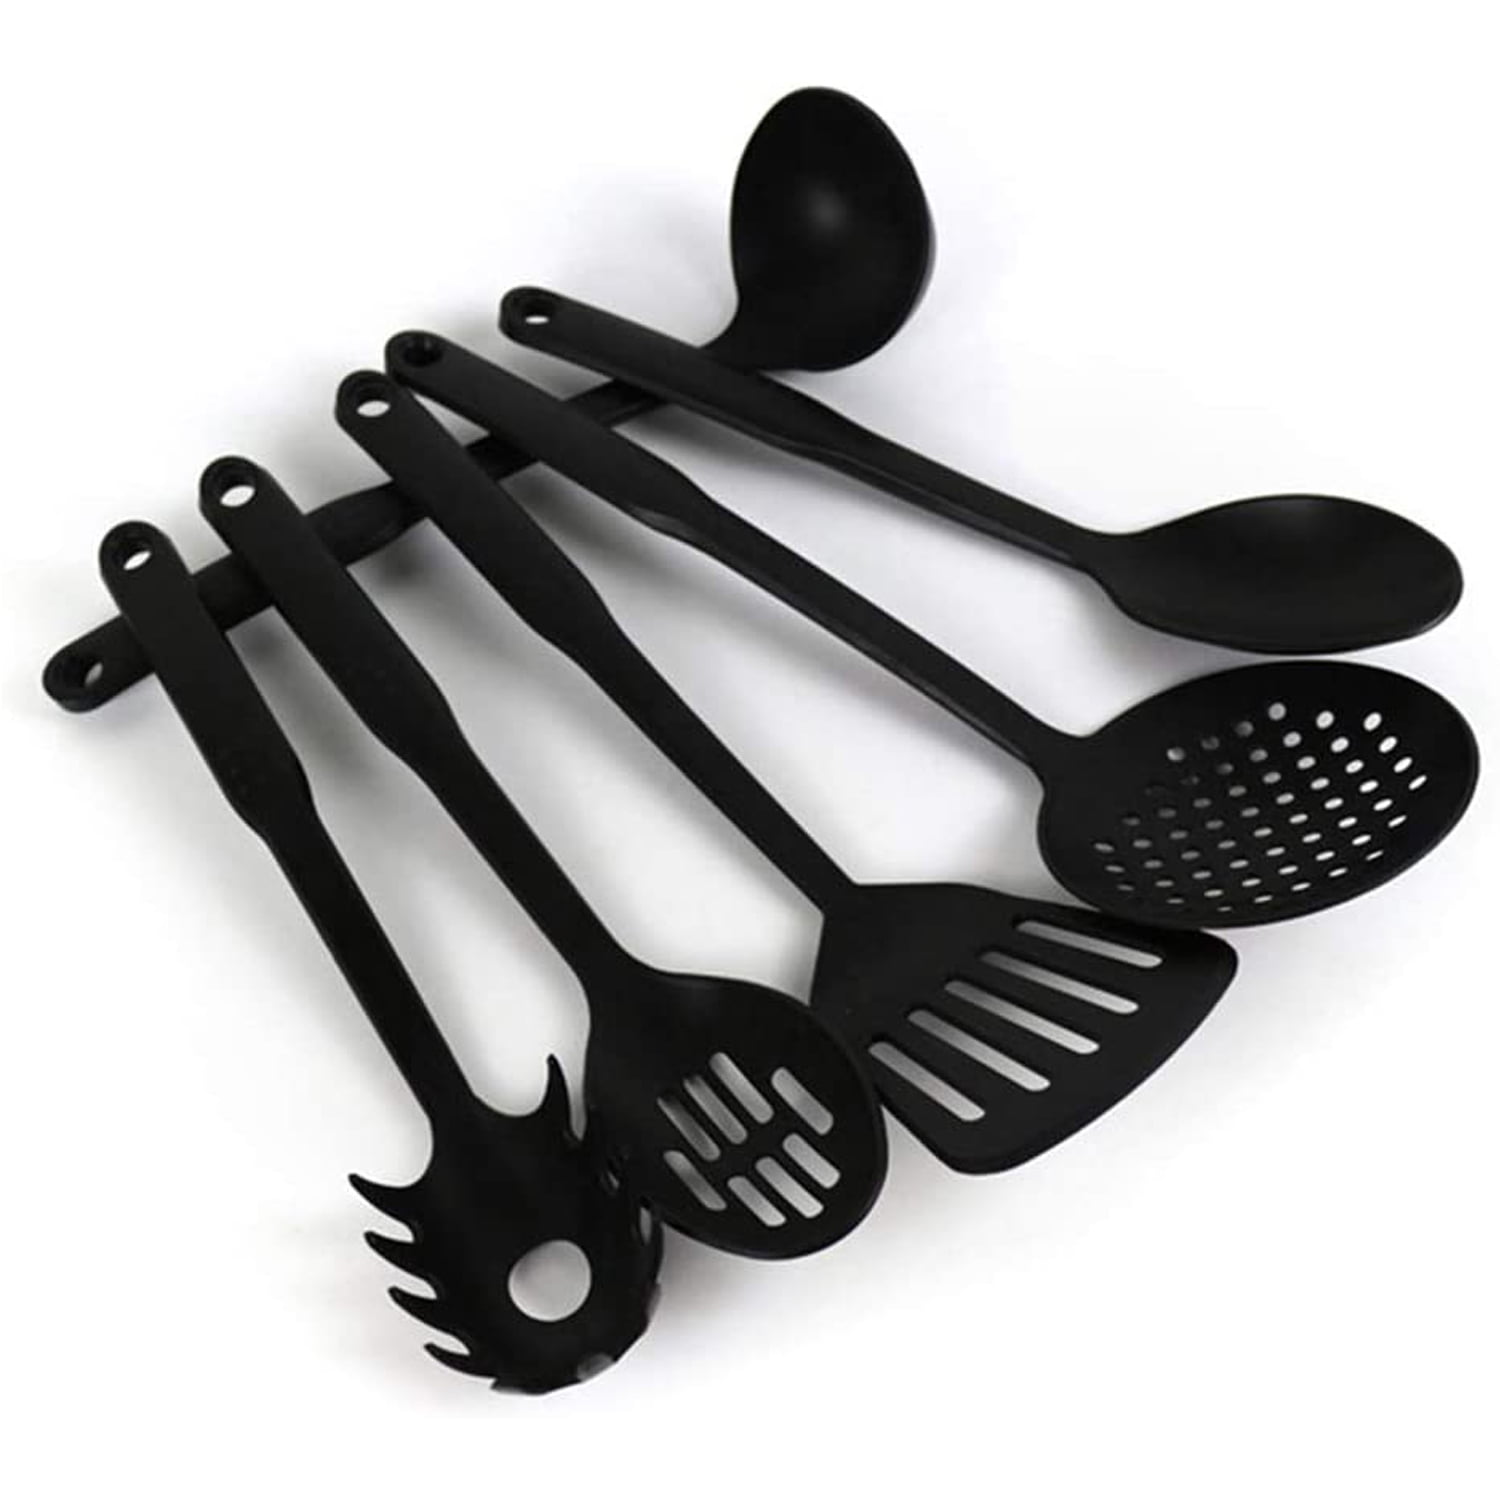 6pcs Free Shipping Product For Kitchen Recommended Hot Sale 2019 